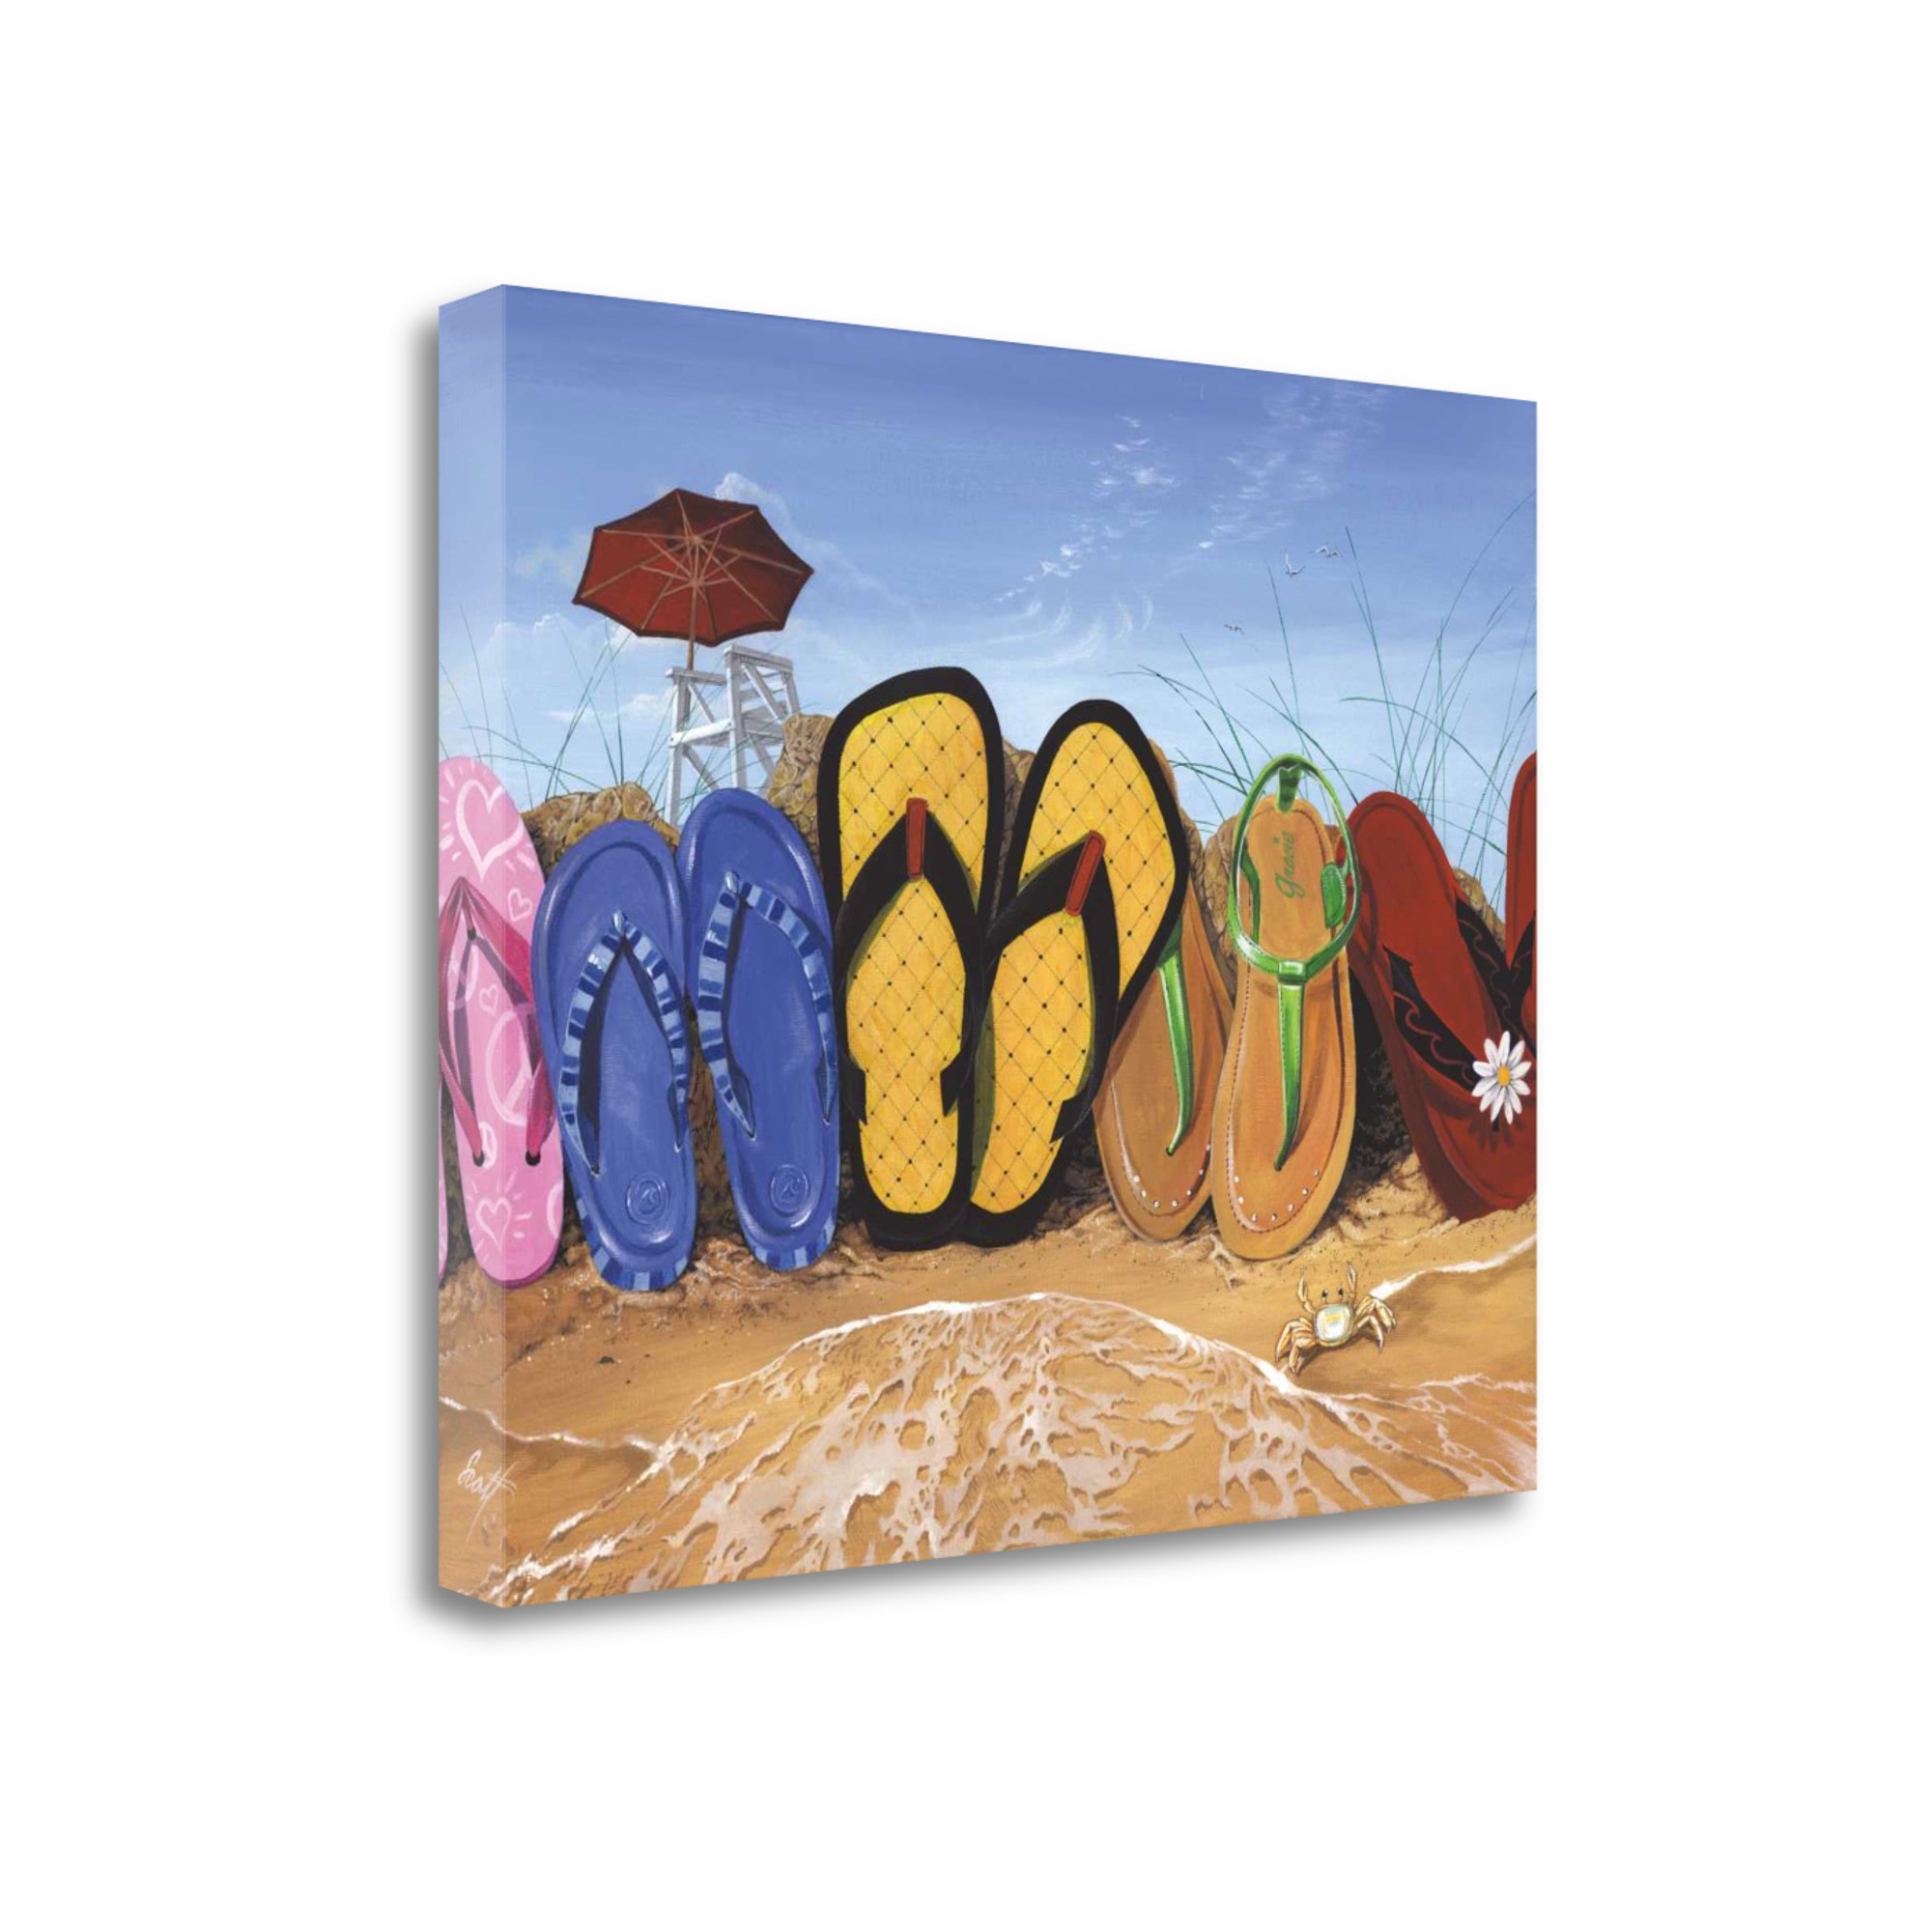 Flip Flops All Lined Up 4 Giclee Wrap Canvas Wall Art